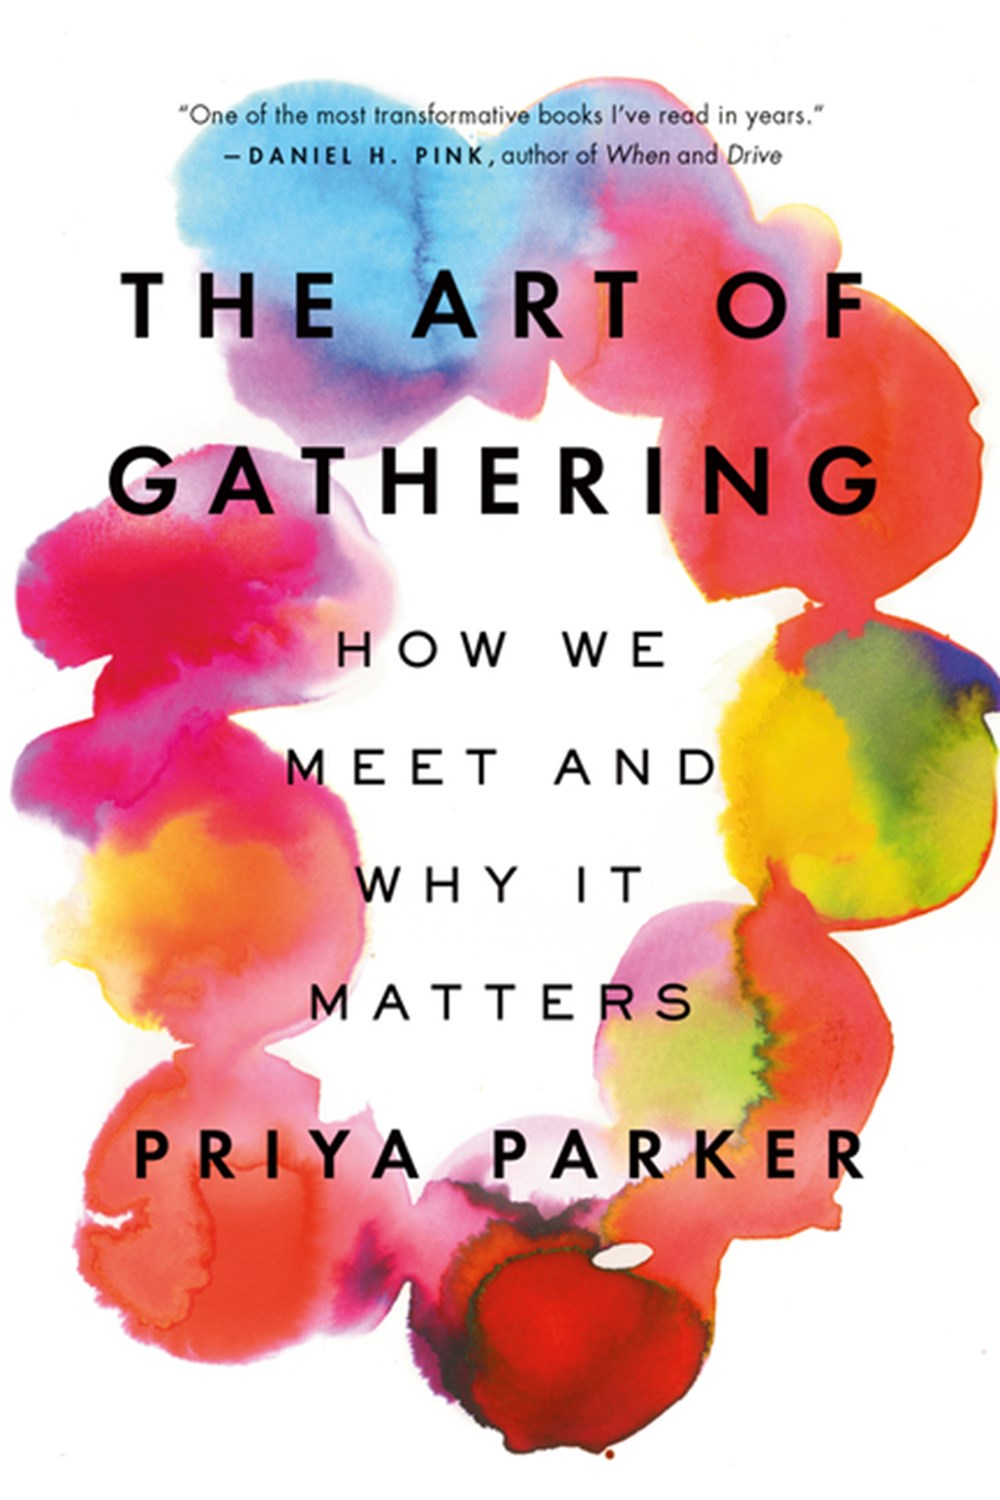 Art of Gathering How We Meet and Why It Matters